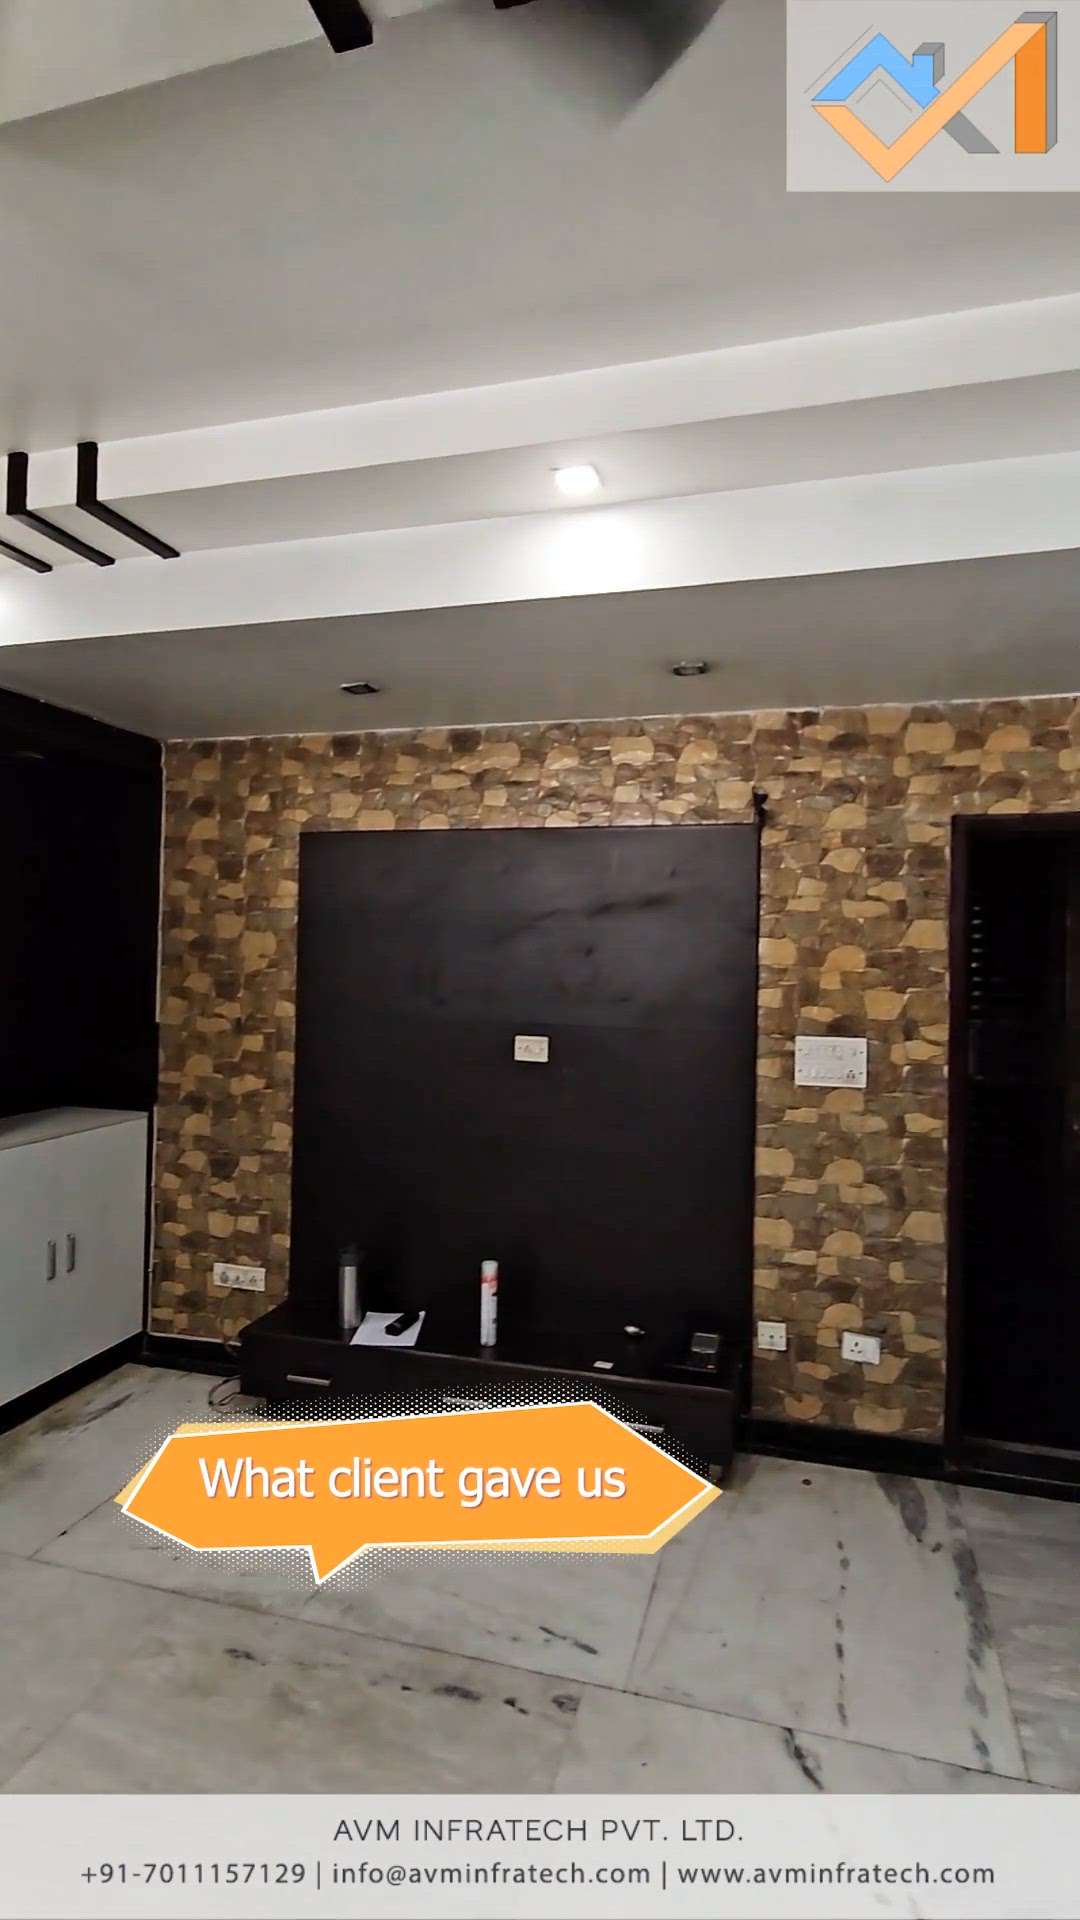 What client gave us and what we gave them back.


Follow us for more such amazing updates. 
.
.
#clientdiaries #client #clientes #cliente #clientlove #clientdairies #clientappreciation #tvpanel #tvpaneldesign #tv #panel #panelling #panels #avminfratech #renovation #renovationproject #project